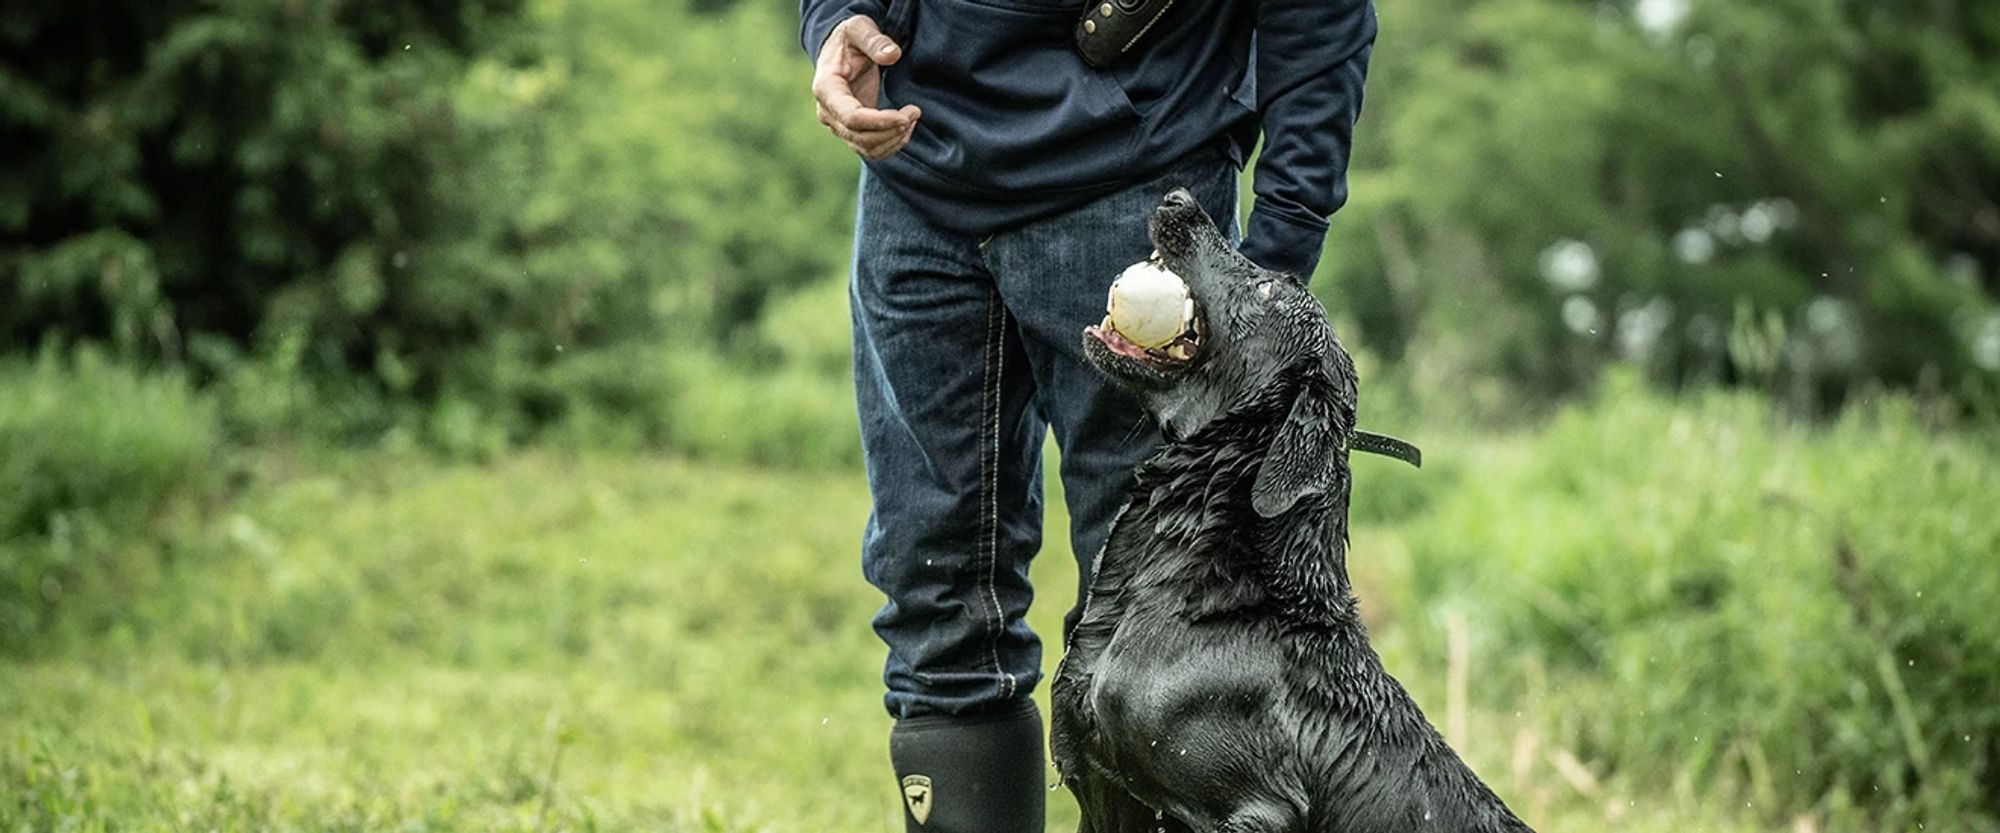 Jeff Fuller training a dog at soggy acres